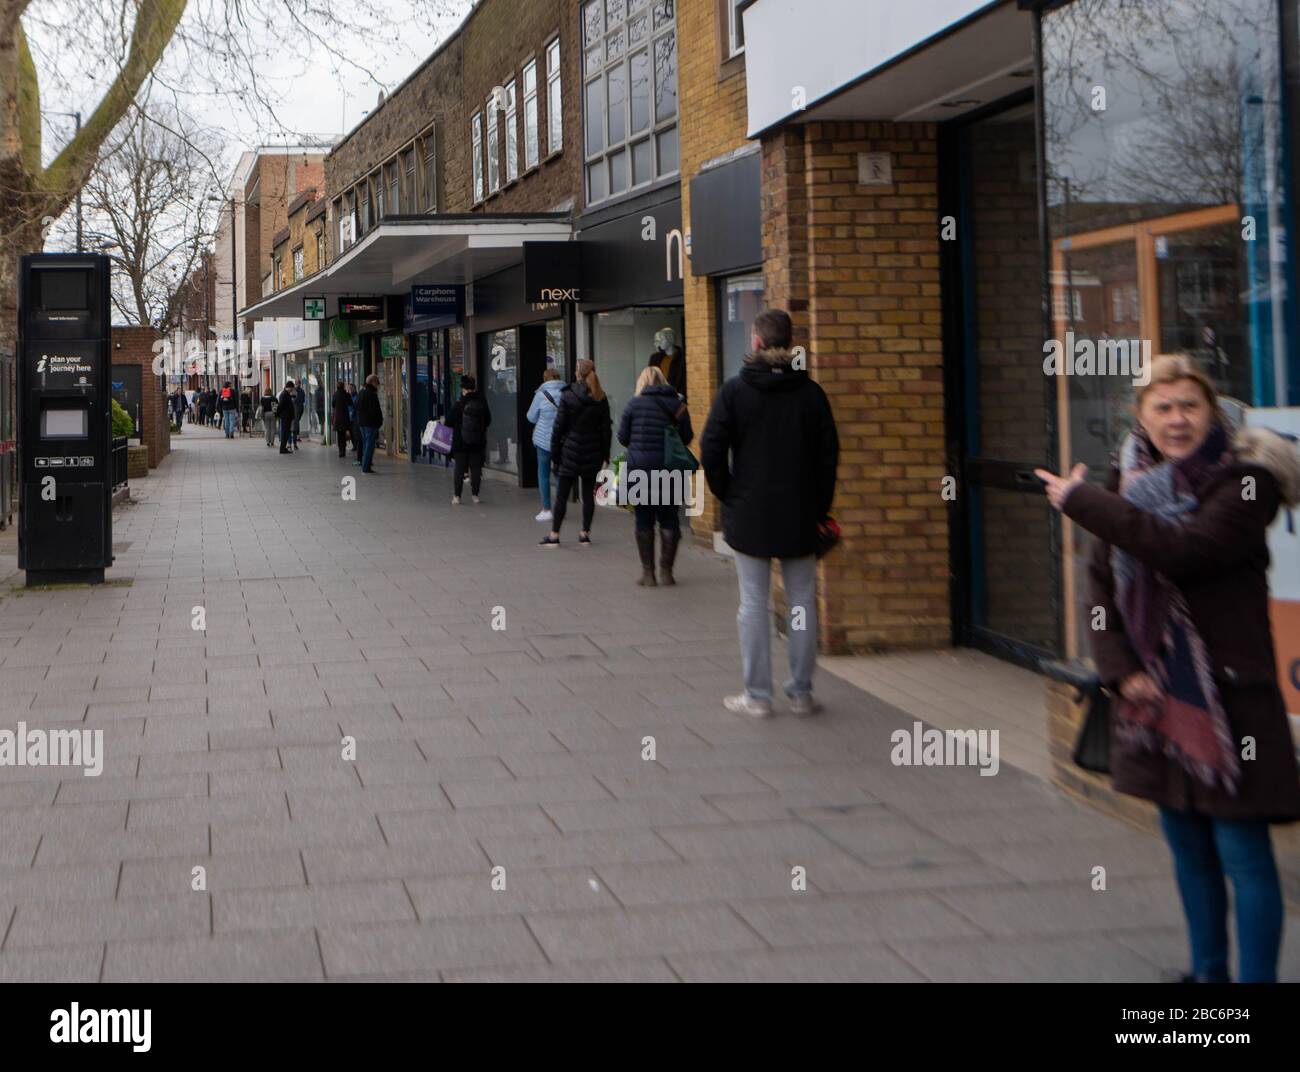 Brentwood Essex, UK. 3rd Apr, 2020. Larger numbers of cars and pedestrians in Brentwood High Street. during the covid lockdown. In particular large lines outside retail banks There was over 70 people in the queue for Marks and Spenser Credit: Ian Davidson/Alamy Live News Stock Photo